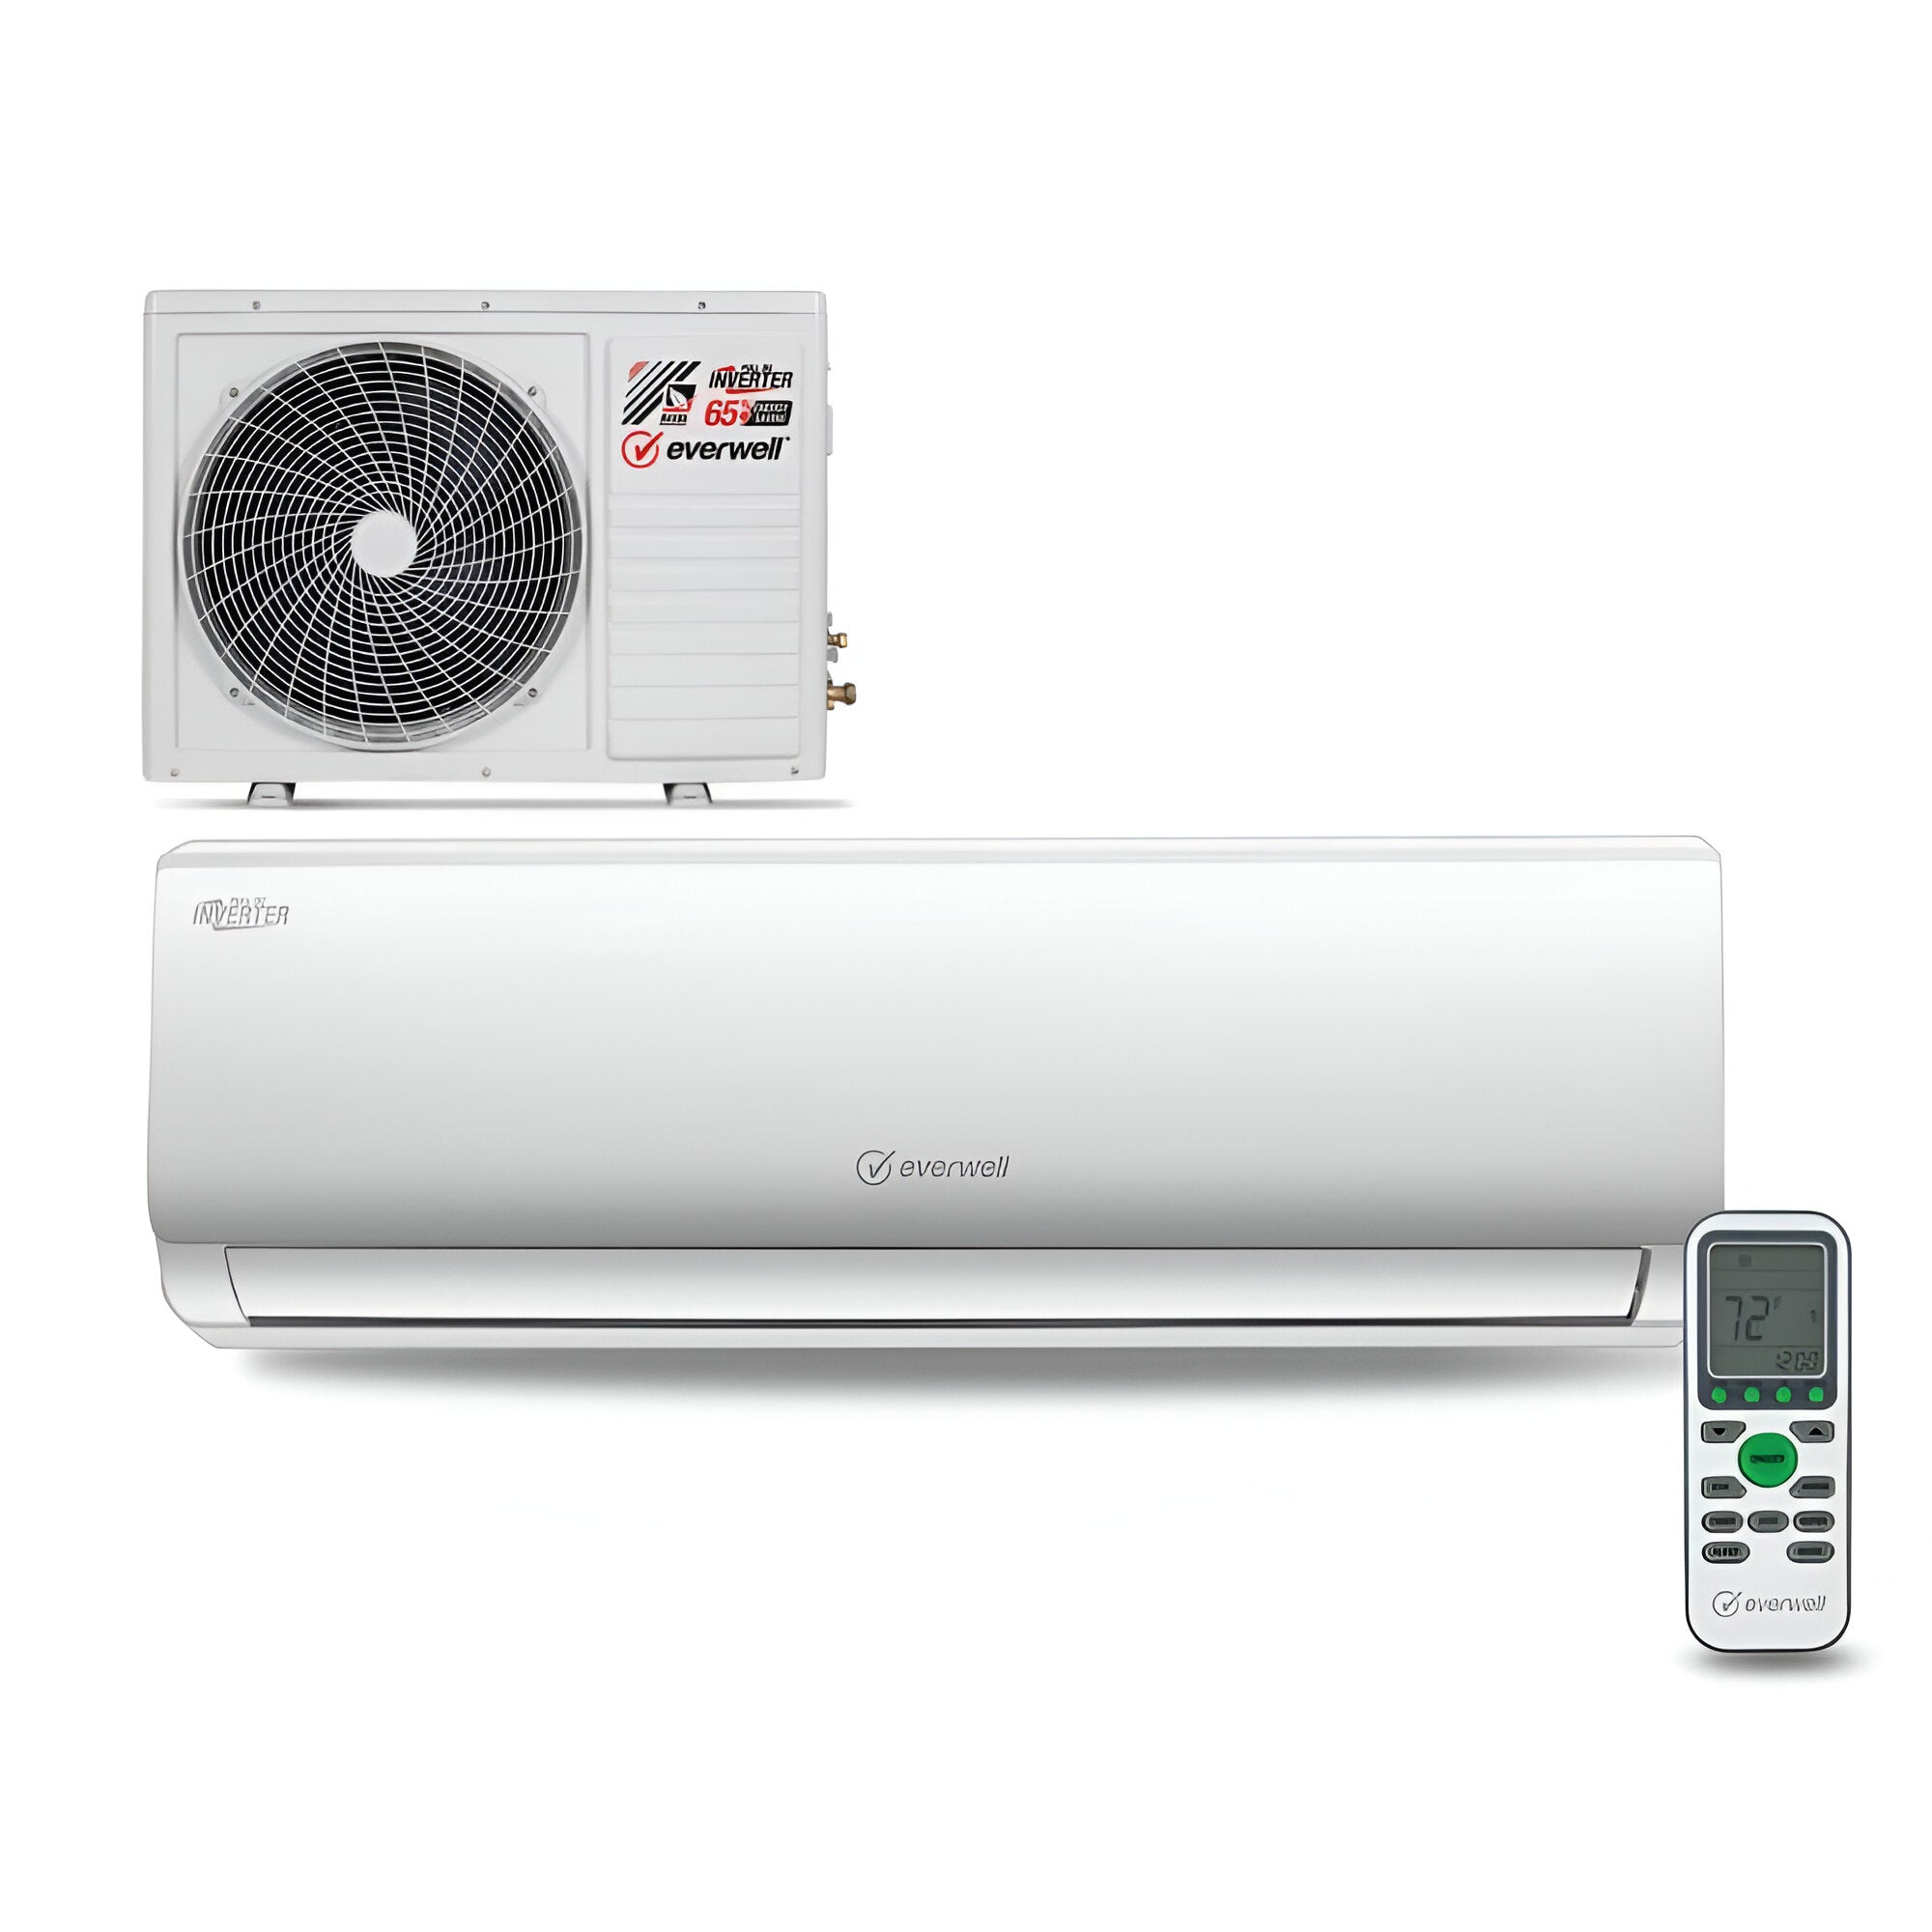 Keep Cool with Everwell: The Minisplit Inverter Technology Air Conditioner